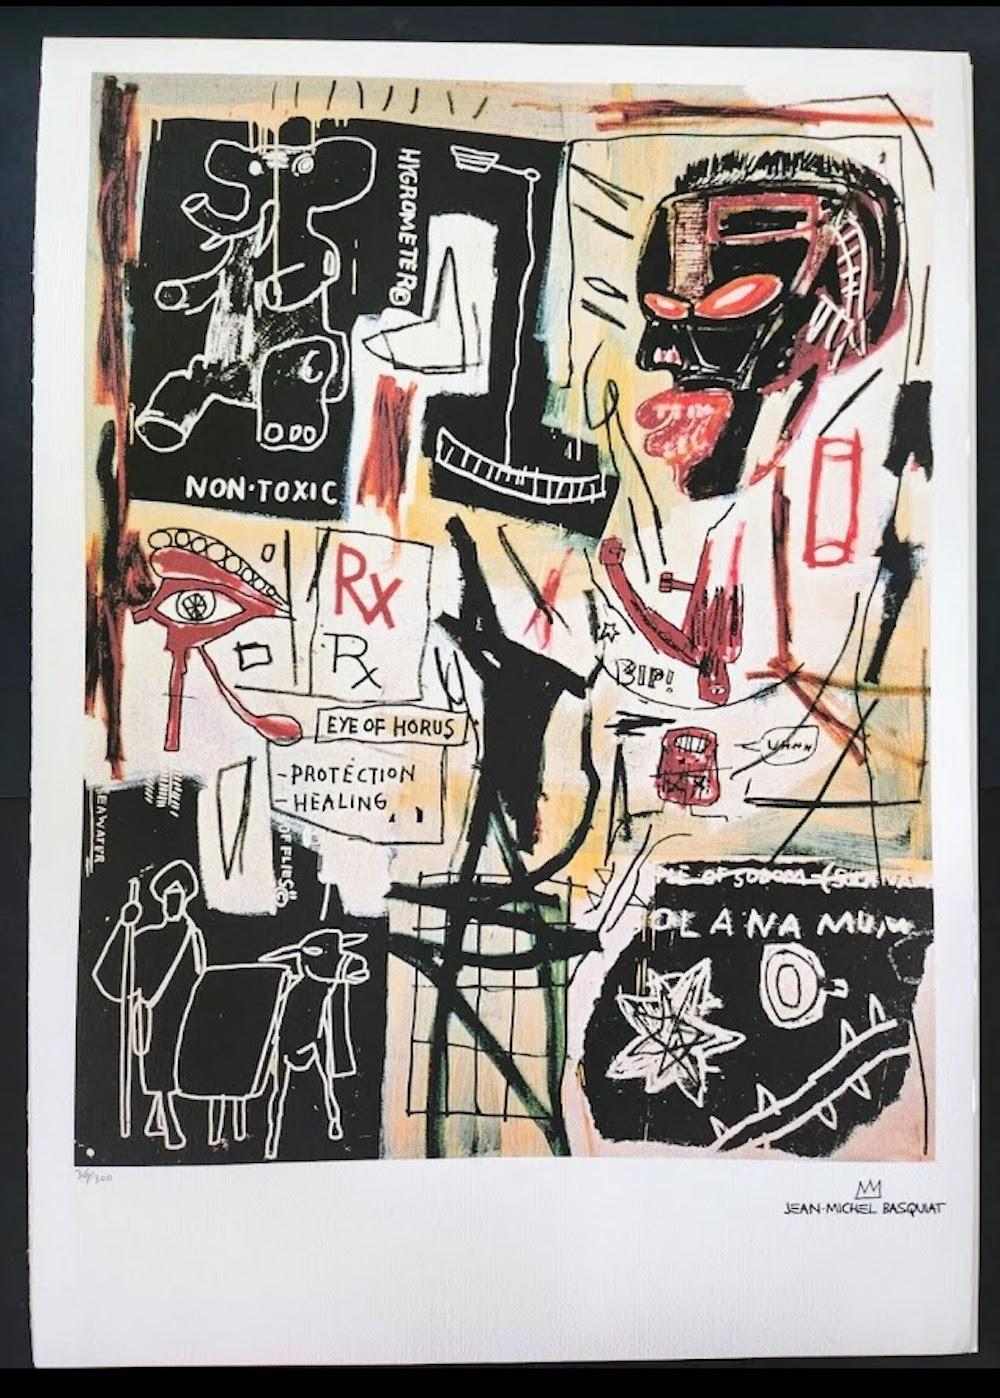 after Jean-Michel Basquiat Figurative Print - The Estate of Jean-Michel Basquiat, "Melting Point of Ice" Lithograph, Ltd  /300